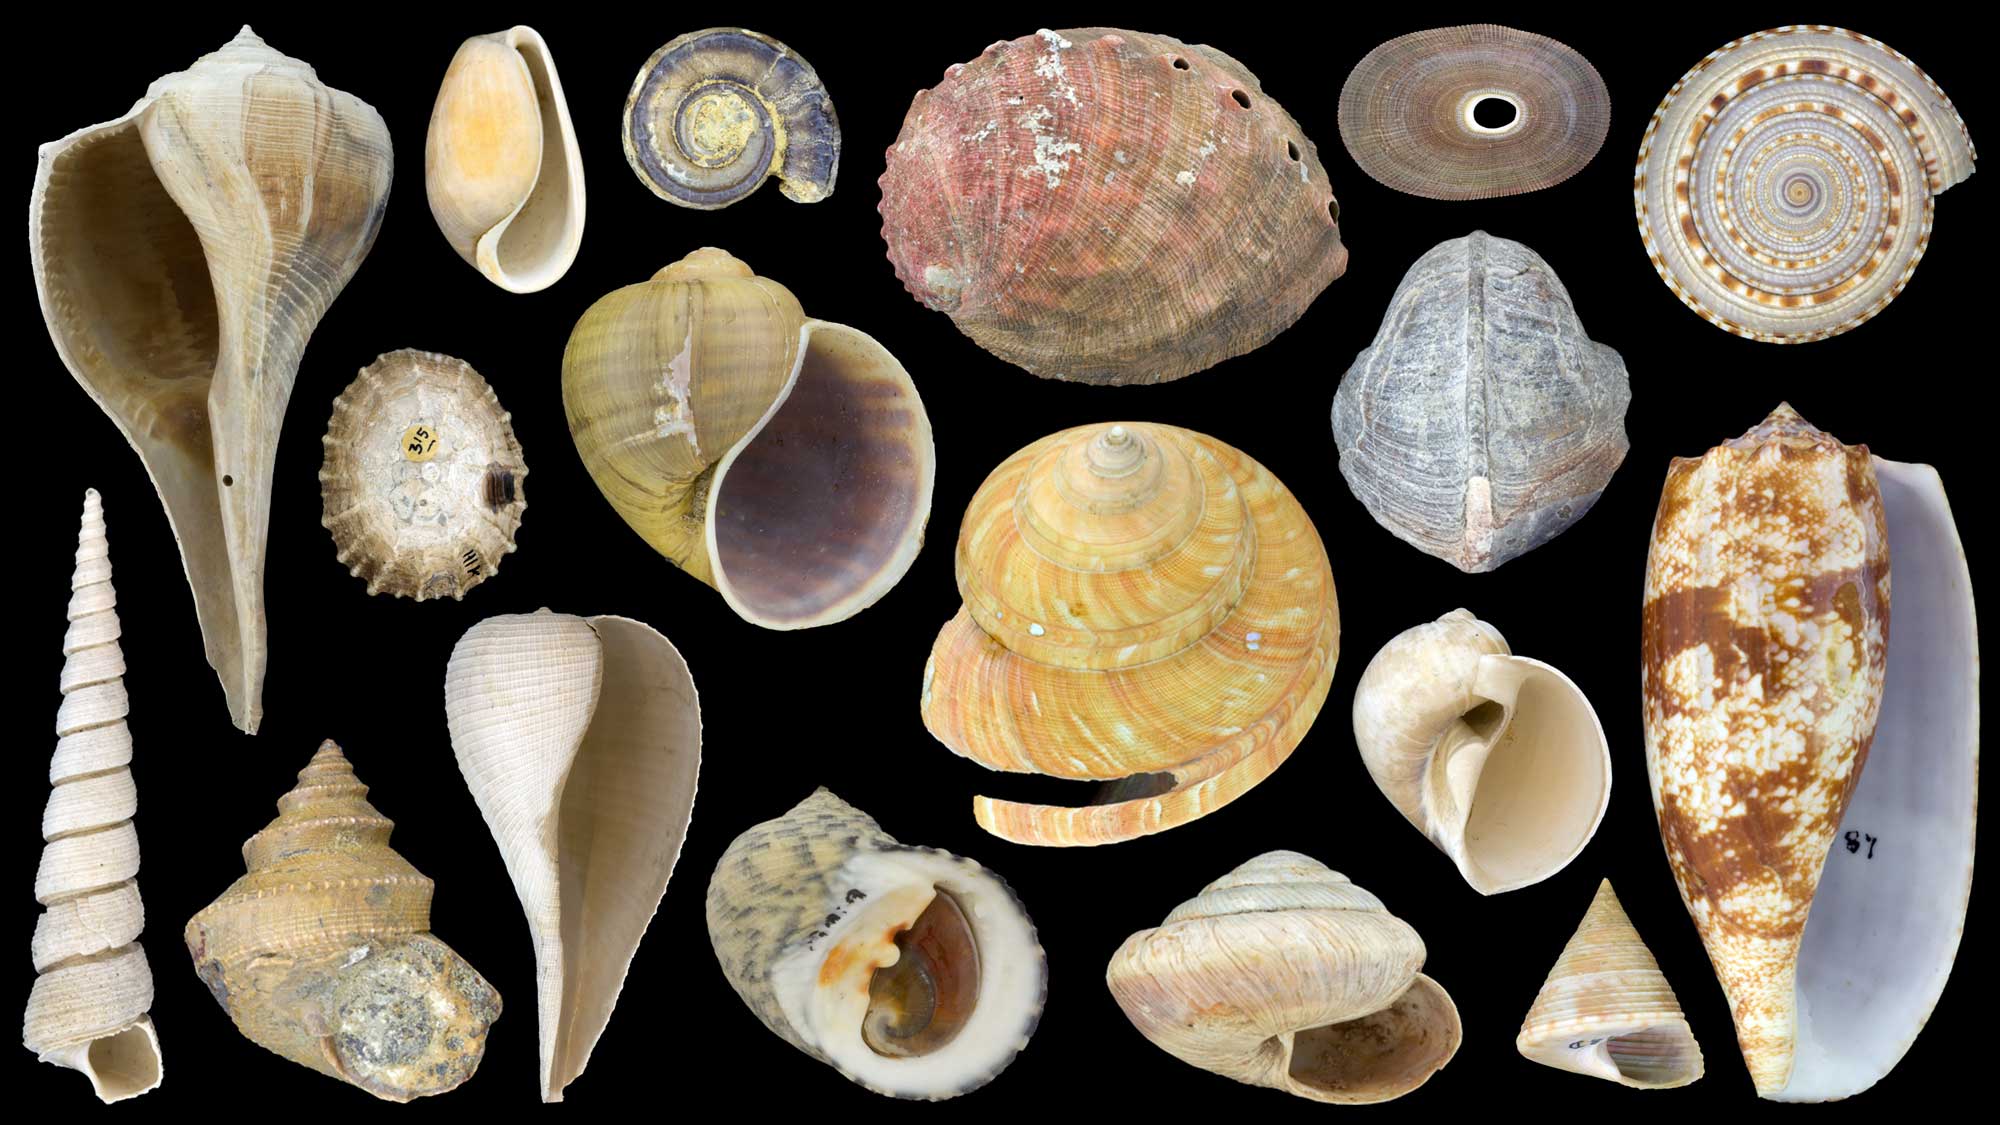 Image showing a variety of different types of modern and fossil gastropod shells.